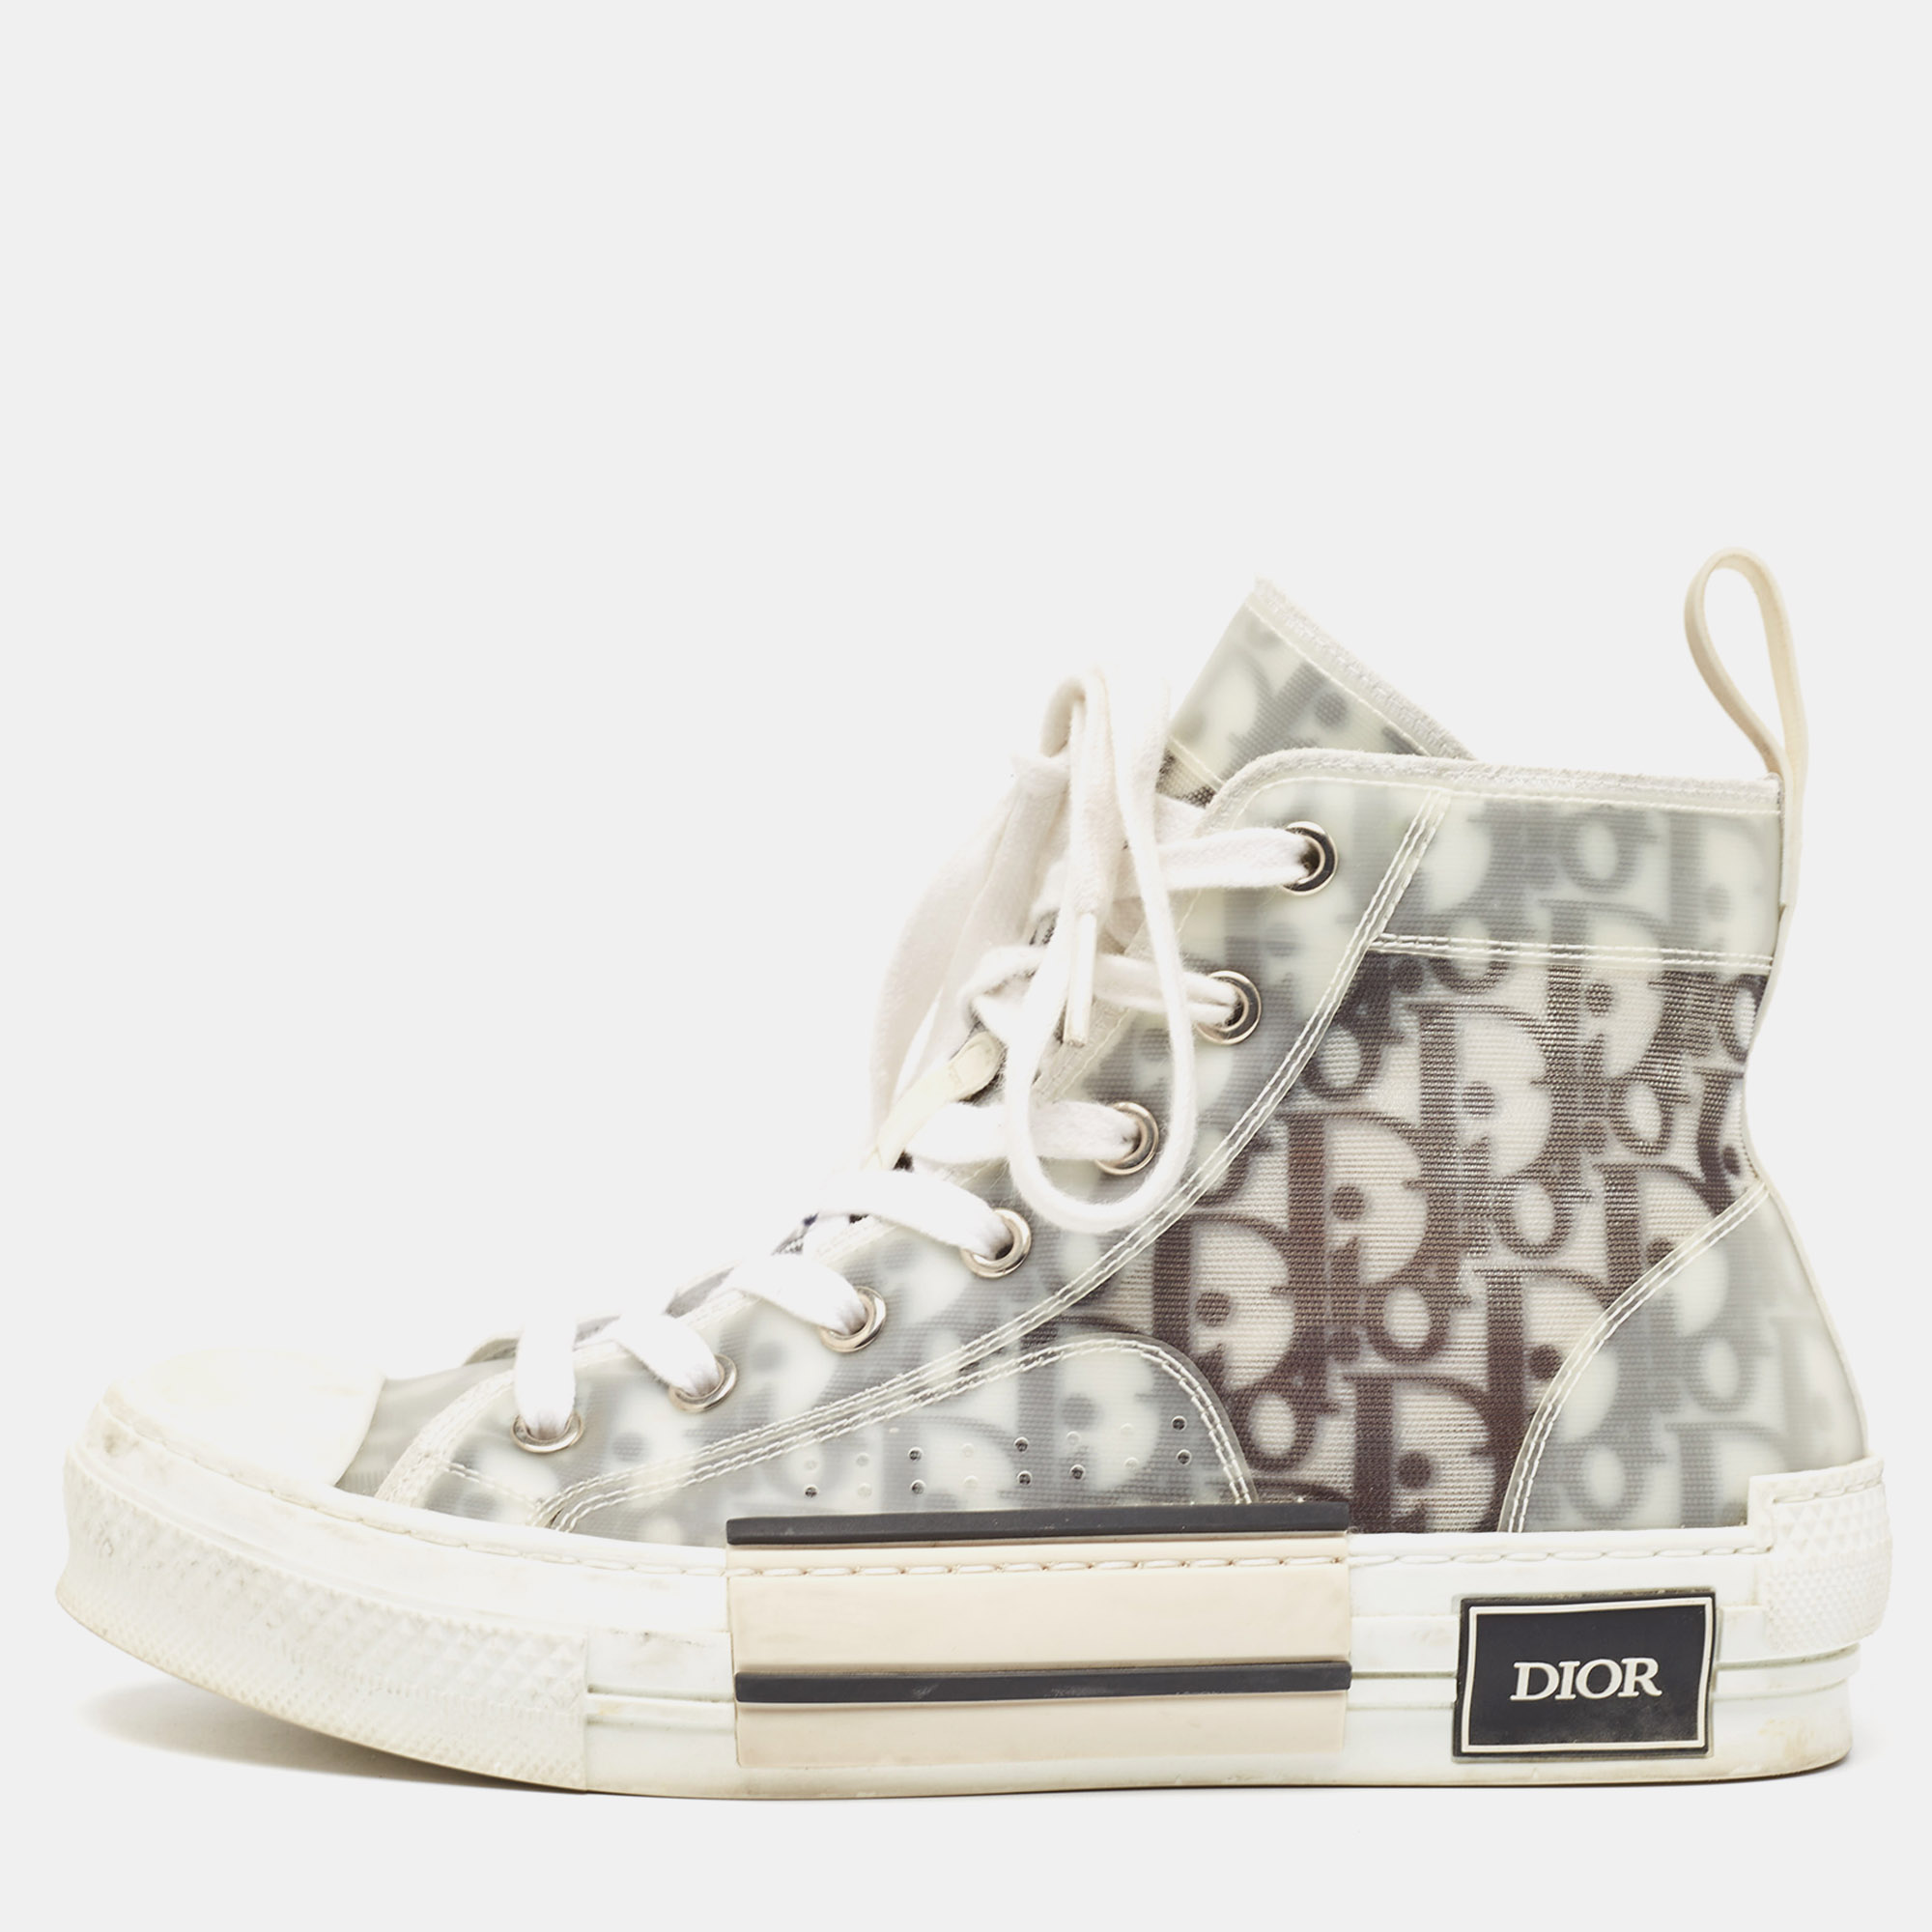 Dior grey pvc and mesh b23 high top sneakers size 37.5